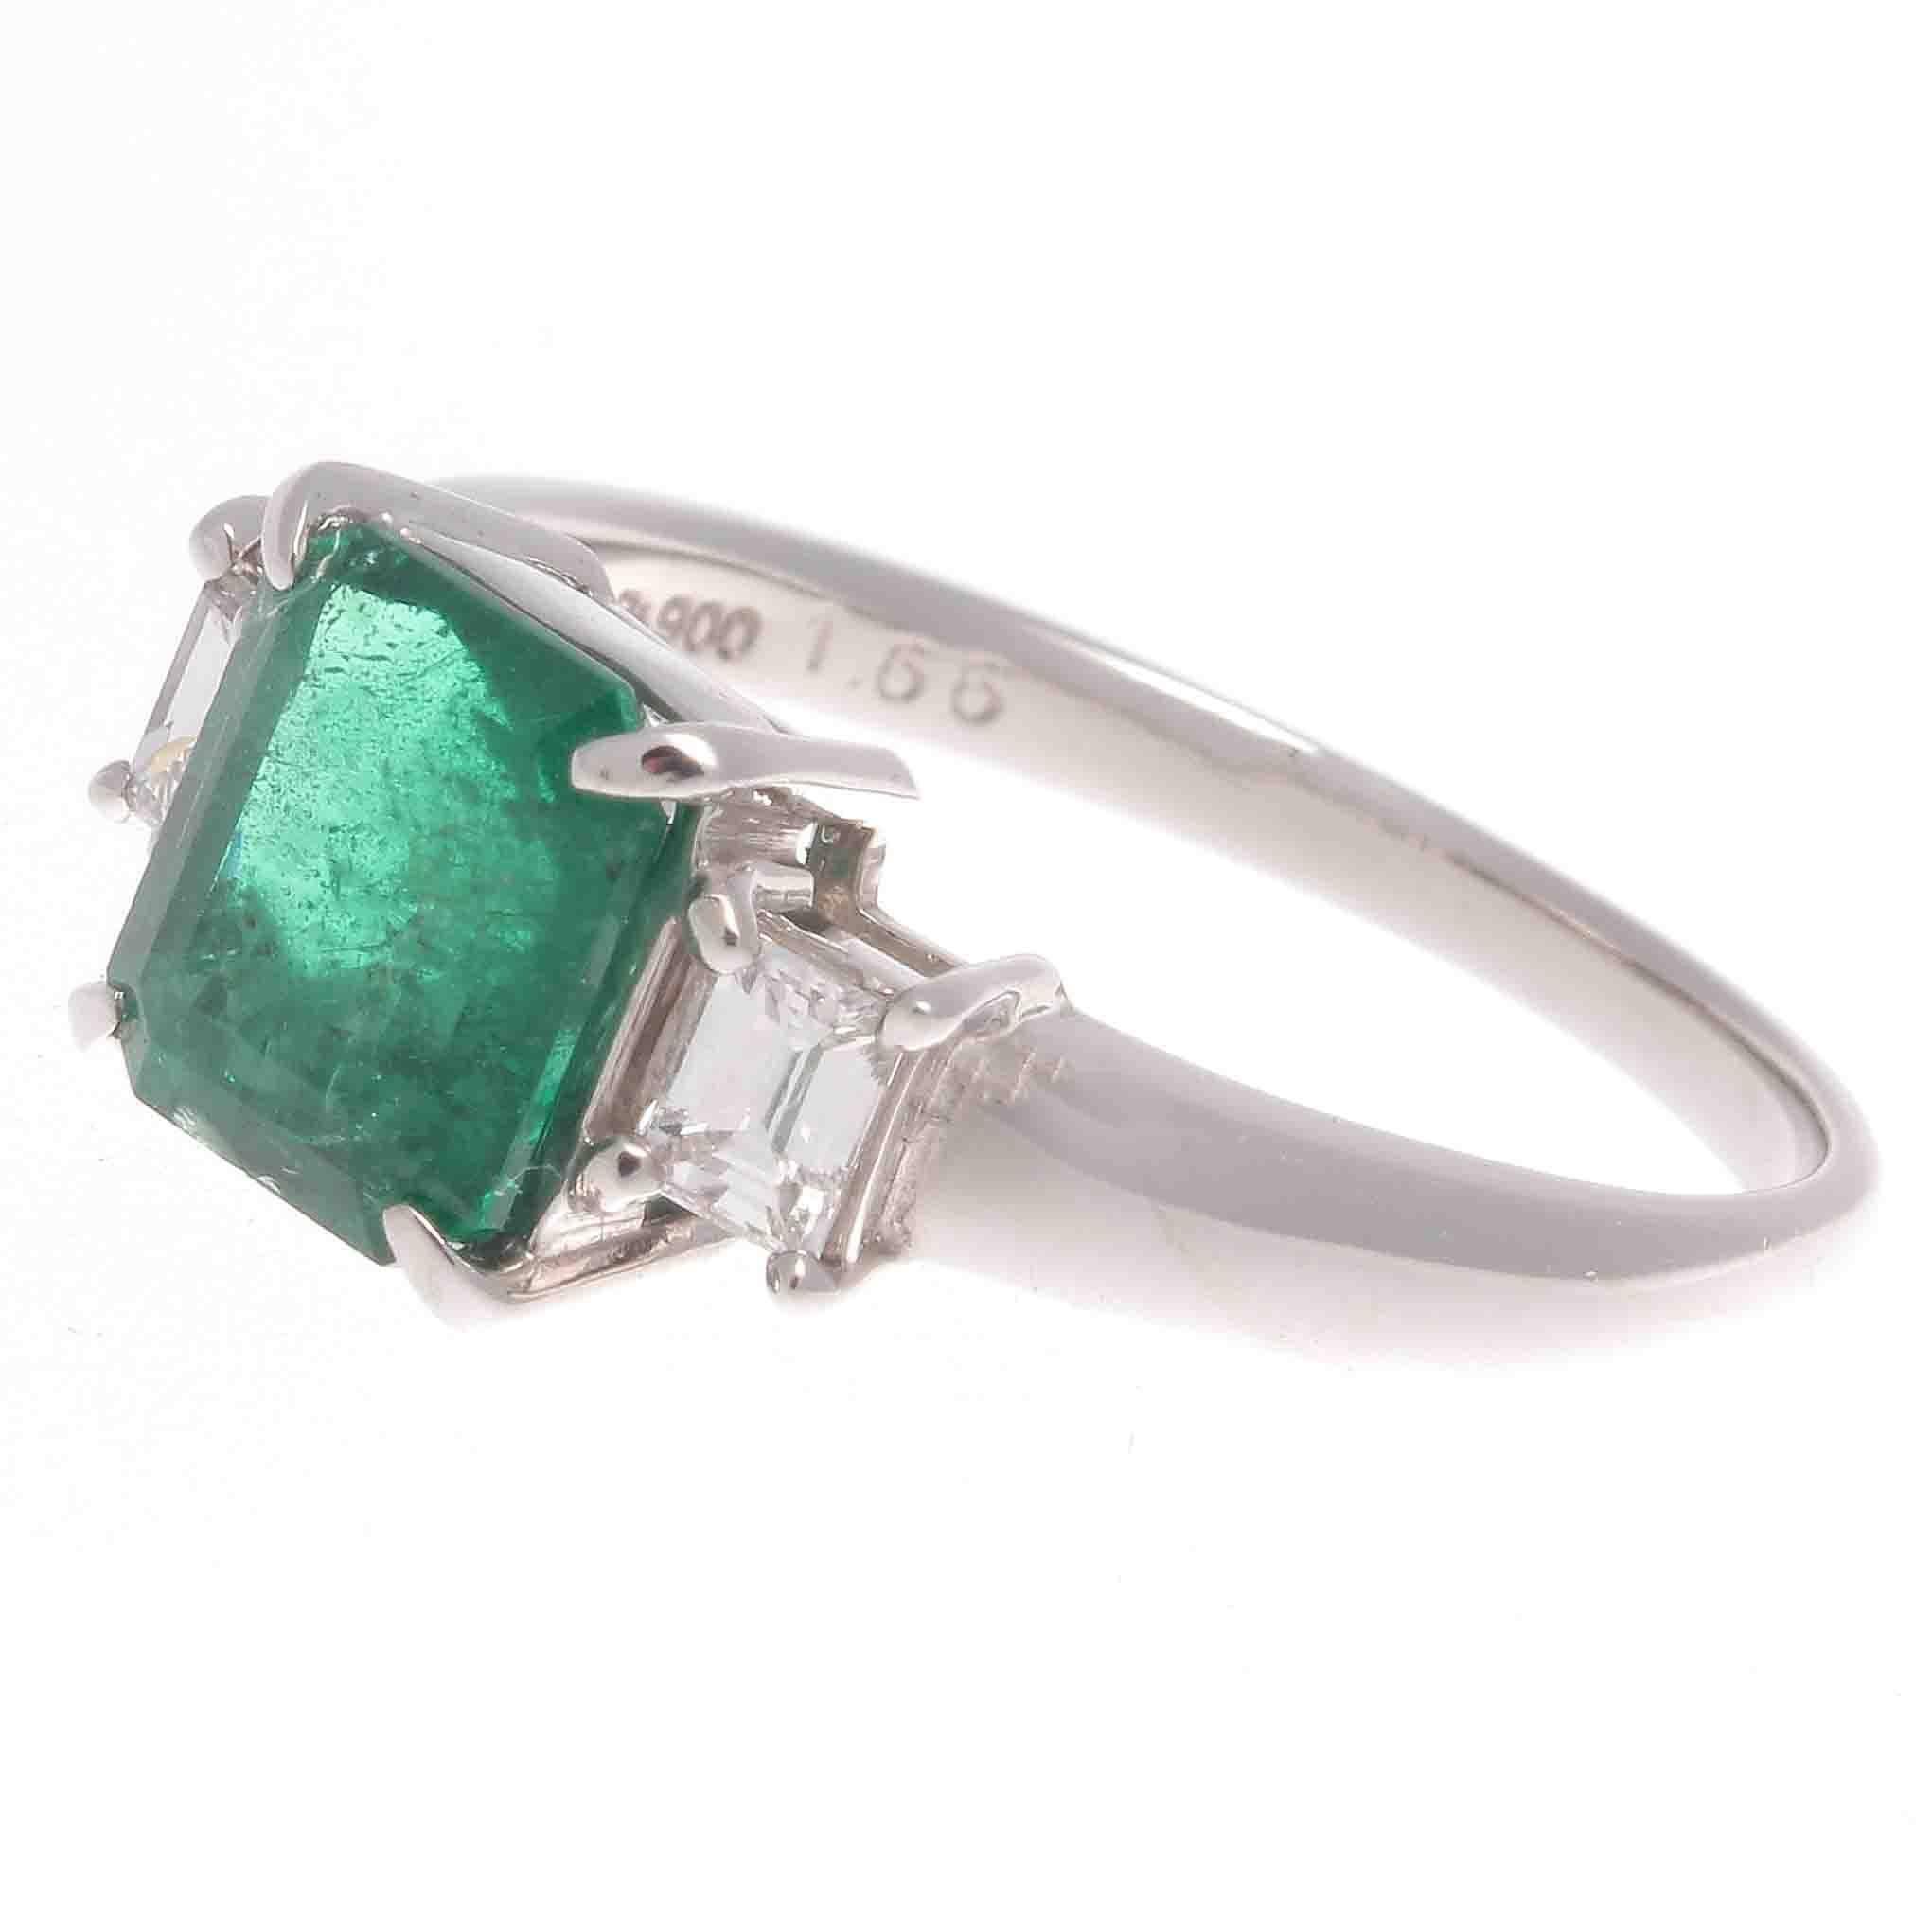 A classic creation of style and grace that has survived many decades of change. Featuring a vibrant 1.66 carat transparent green emerald that is perfectly complimented by 2 emerald cut diamonds weighing a total of 0.29 carats. Crafted in